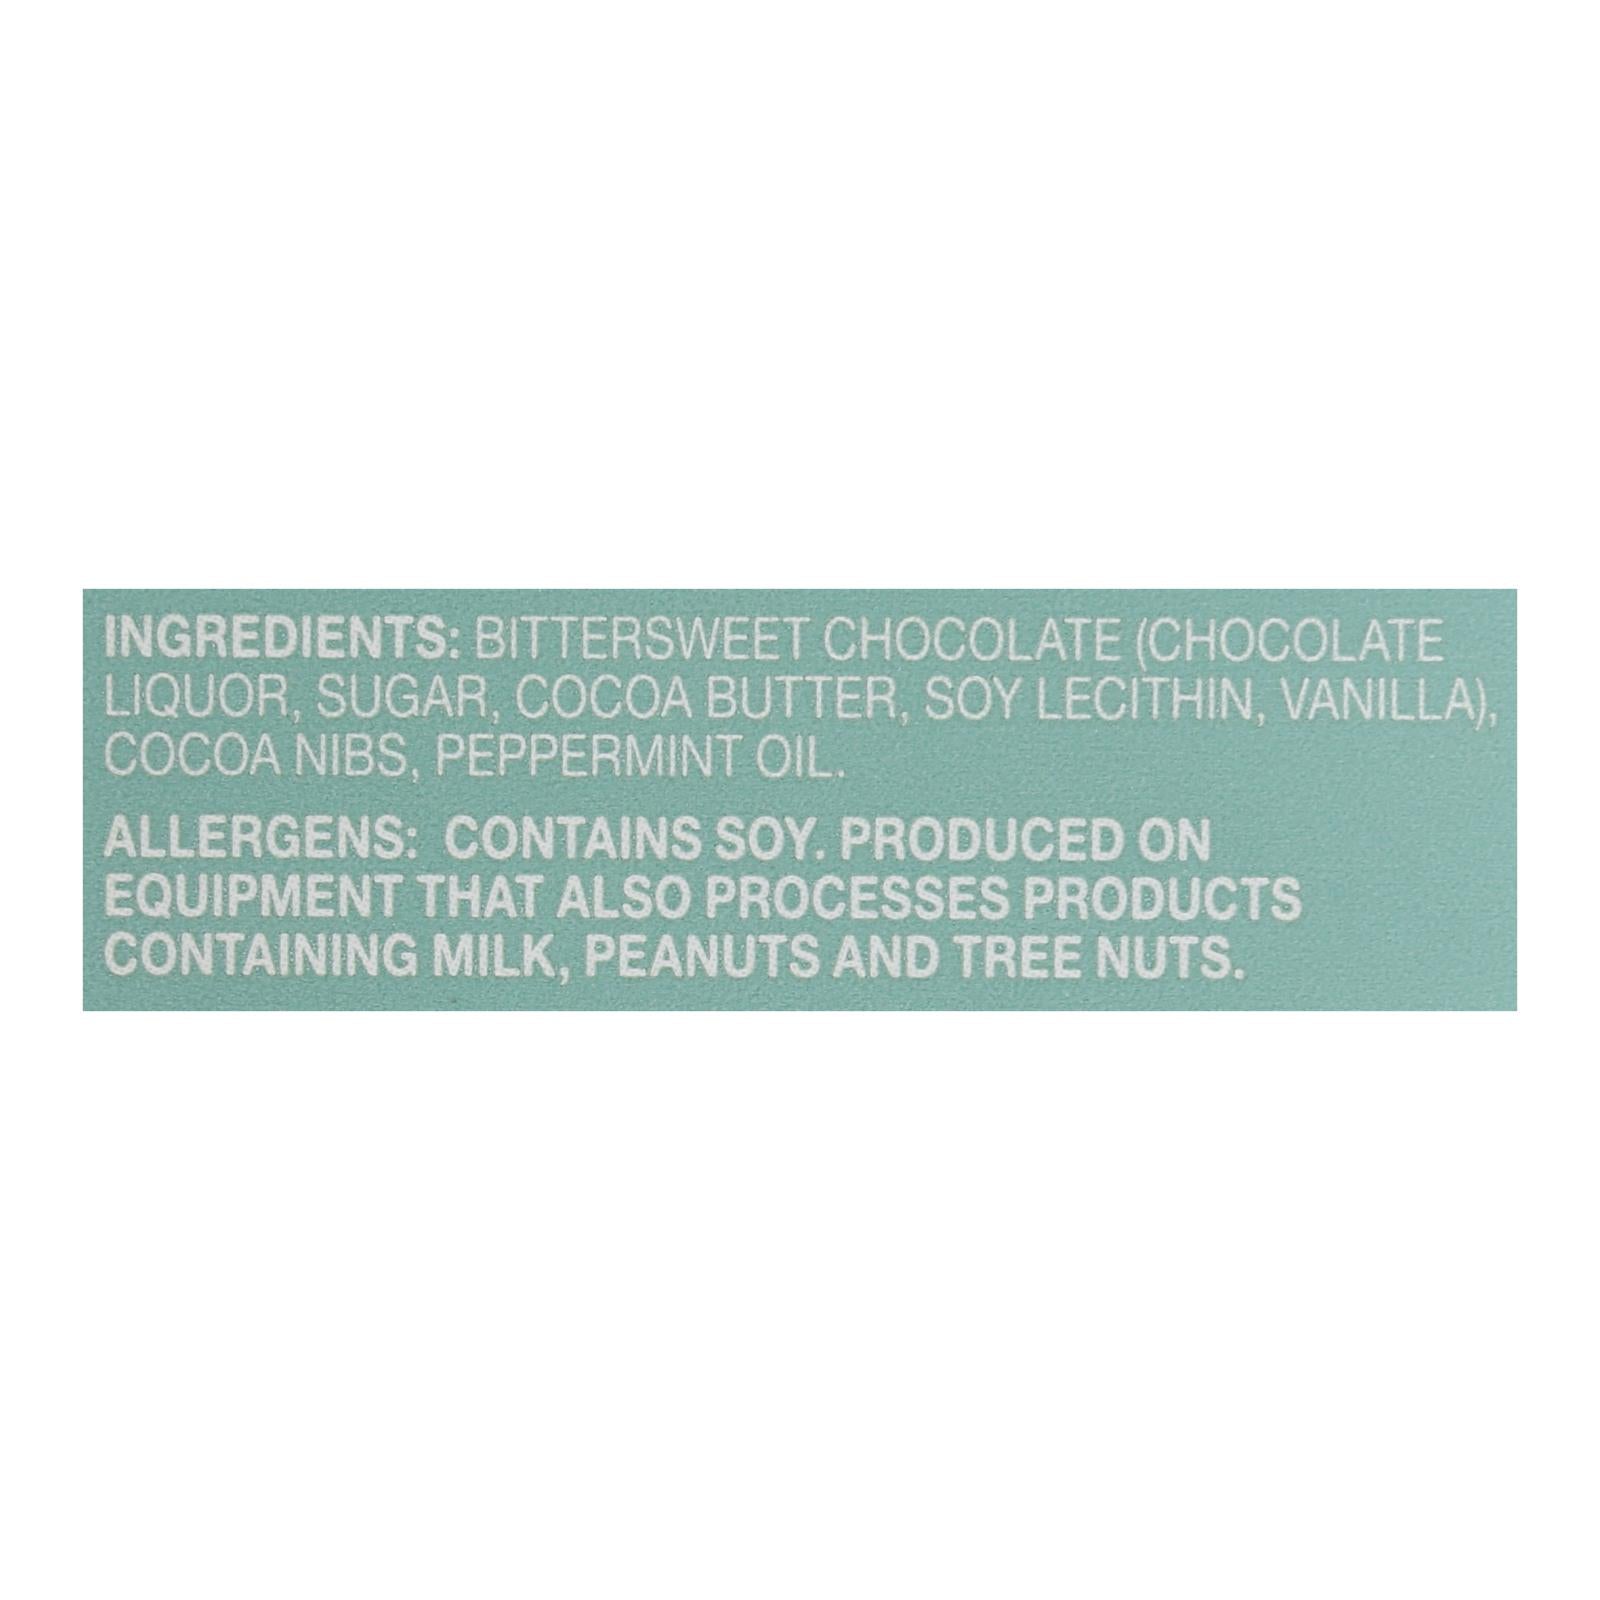 Our Endangered Species Chocolate Dark Chocolate Bar With Peppermint Crunch  - Case of 12 - 3 OZ